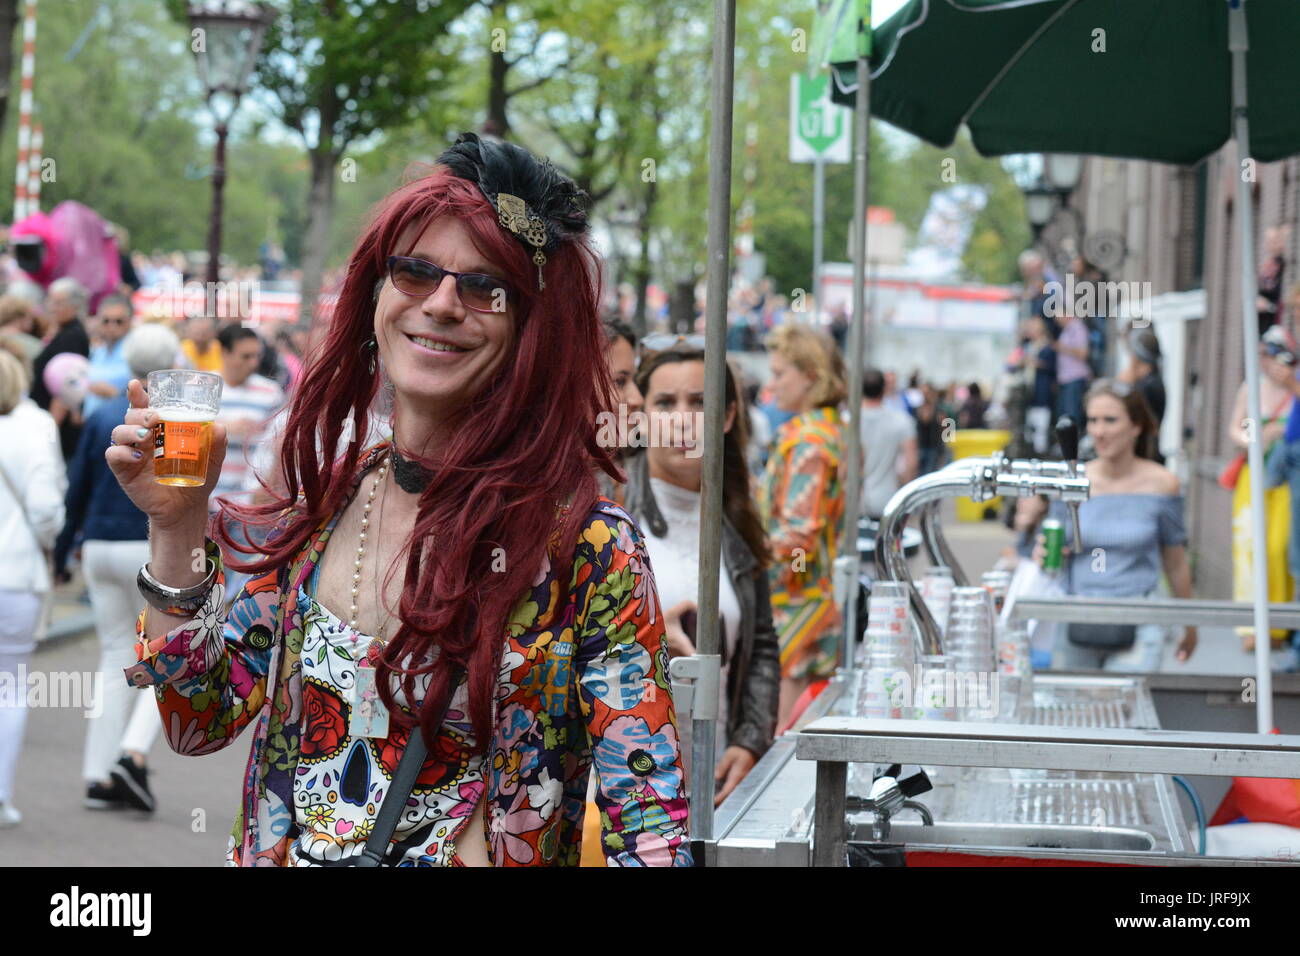 A reveller in drag drinks a toast to celebrate Amsterdam gay prIde. Credit: Patricia Phillips/Alamy live news Stock Photo